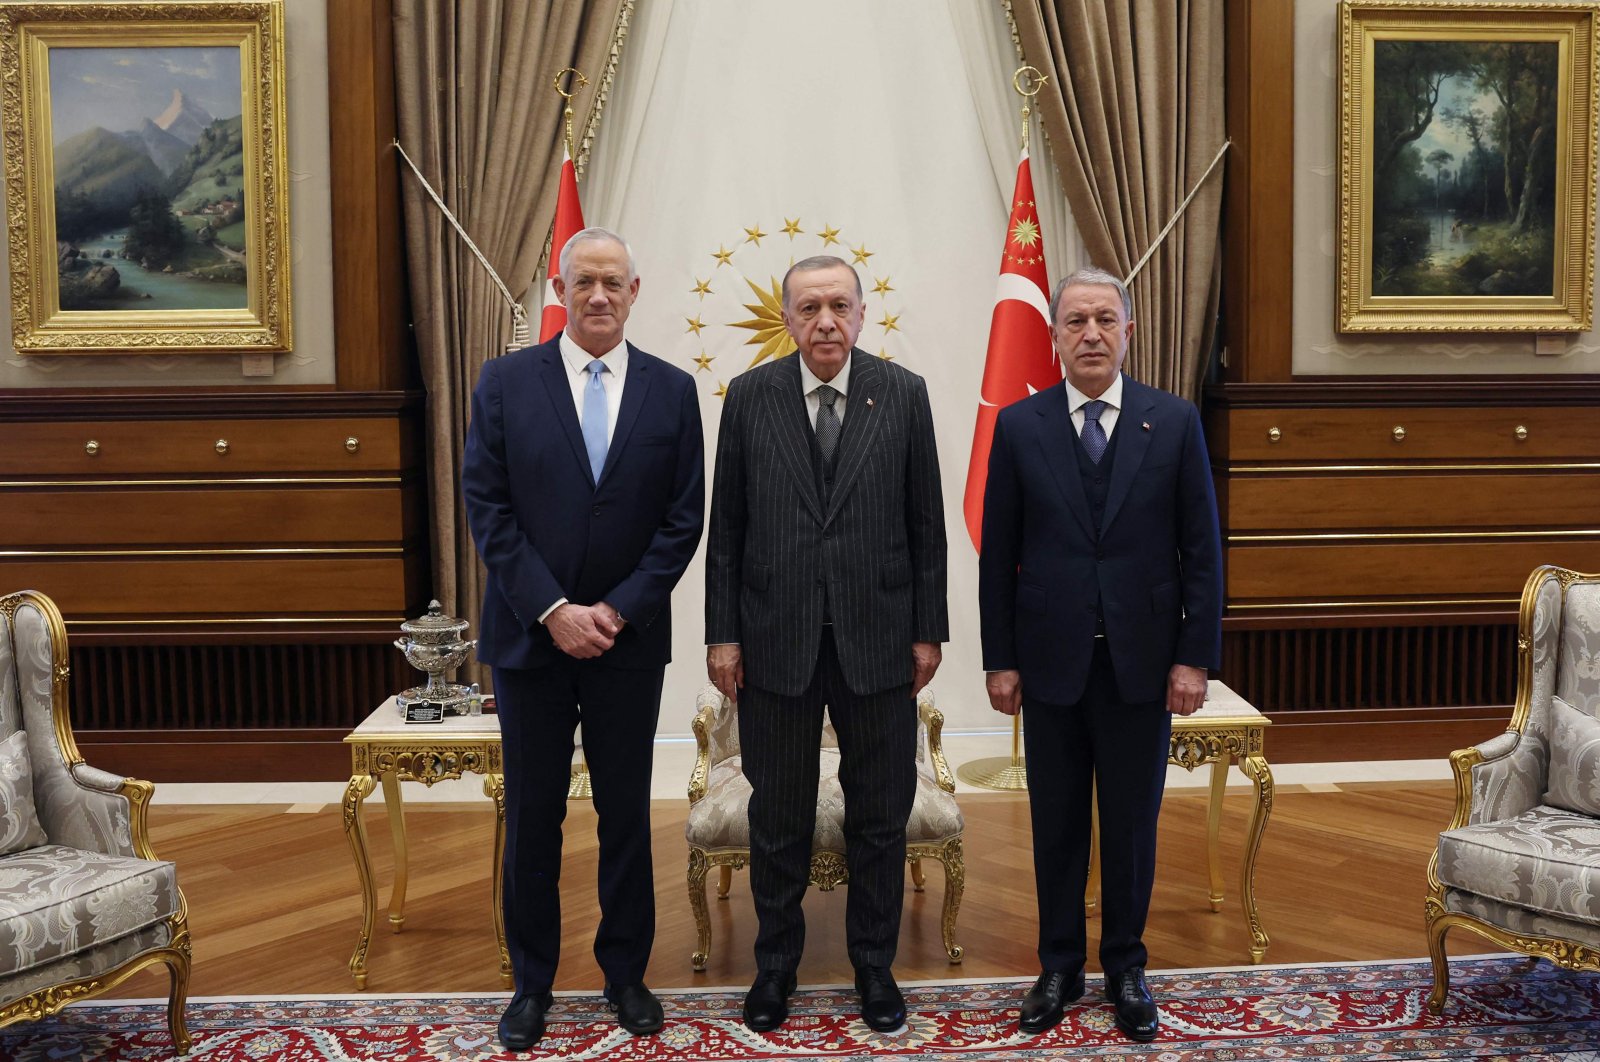 This handout picture released on October 27, 2022 by the Press Office of the Ministry of National Defense shows Turkish President Recep Tayyip Erdoğan (C) posing for a photo with Israeli Defense Minister Benjamin Gantz (L) and Turkish Defense Minister Hulusi Akar (R) at the Presidential Complex in Ankara, Türkiye, (AFP Photo)